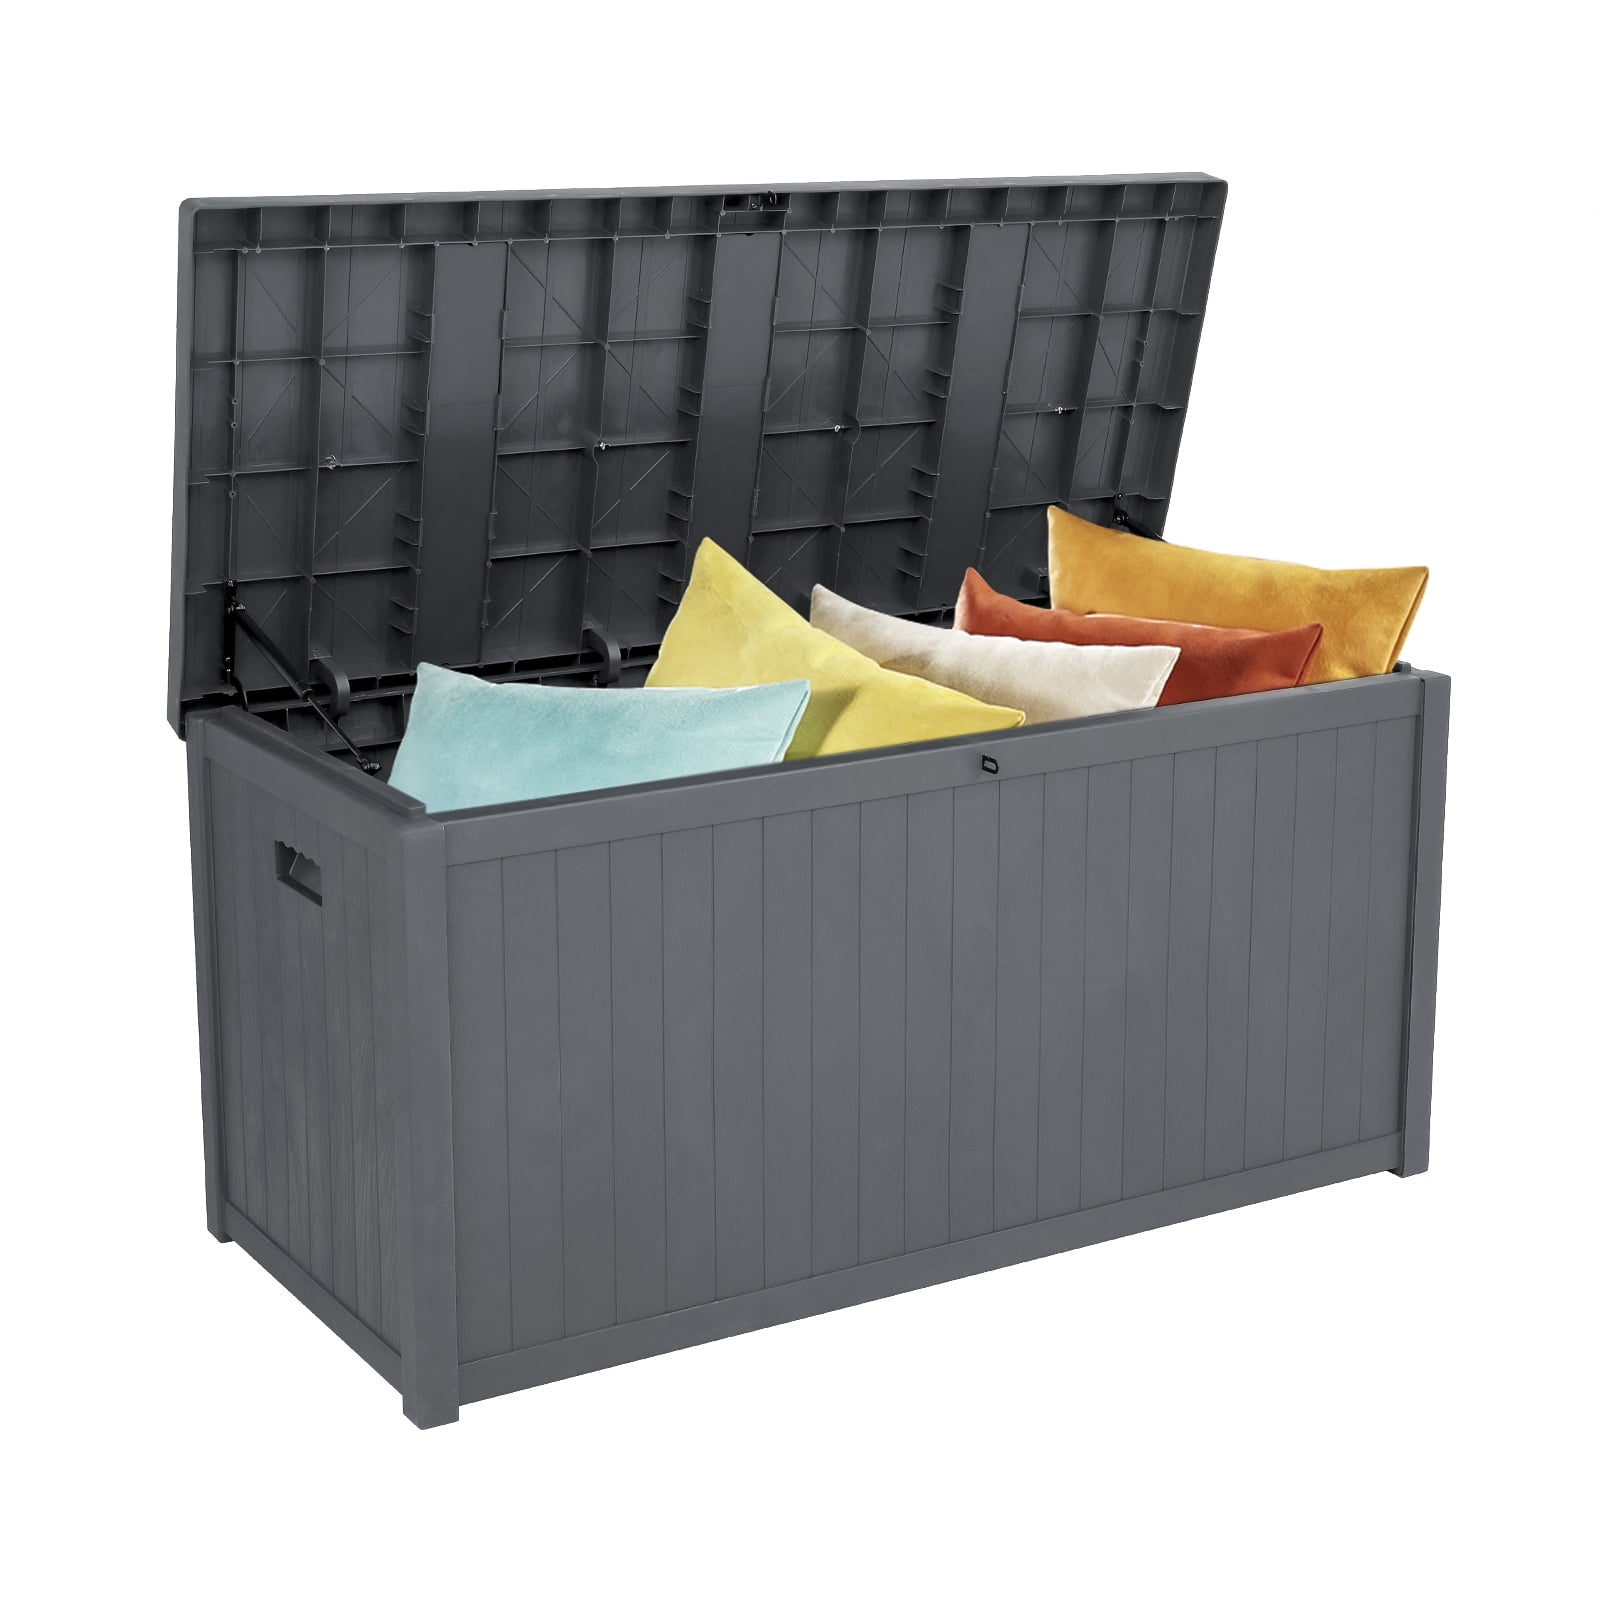 Vervolg zuurstof geloof 113 Gallon Resin Deck Box, Patio Storage Chest with Lid, Outdoor Waterproof  Storage Cabinet, Backyard Storage Container for Patio Furniture Cushions,  Kids' Toys, Garden Tools, Gray, D7983 - Walmart.com